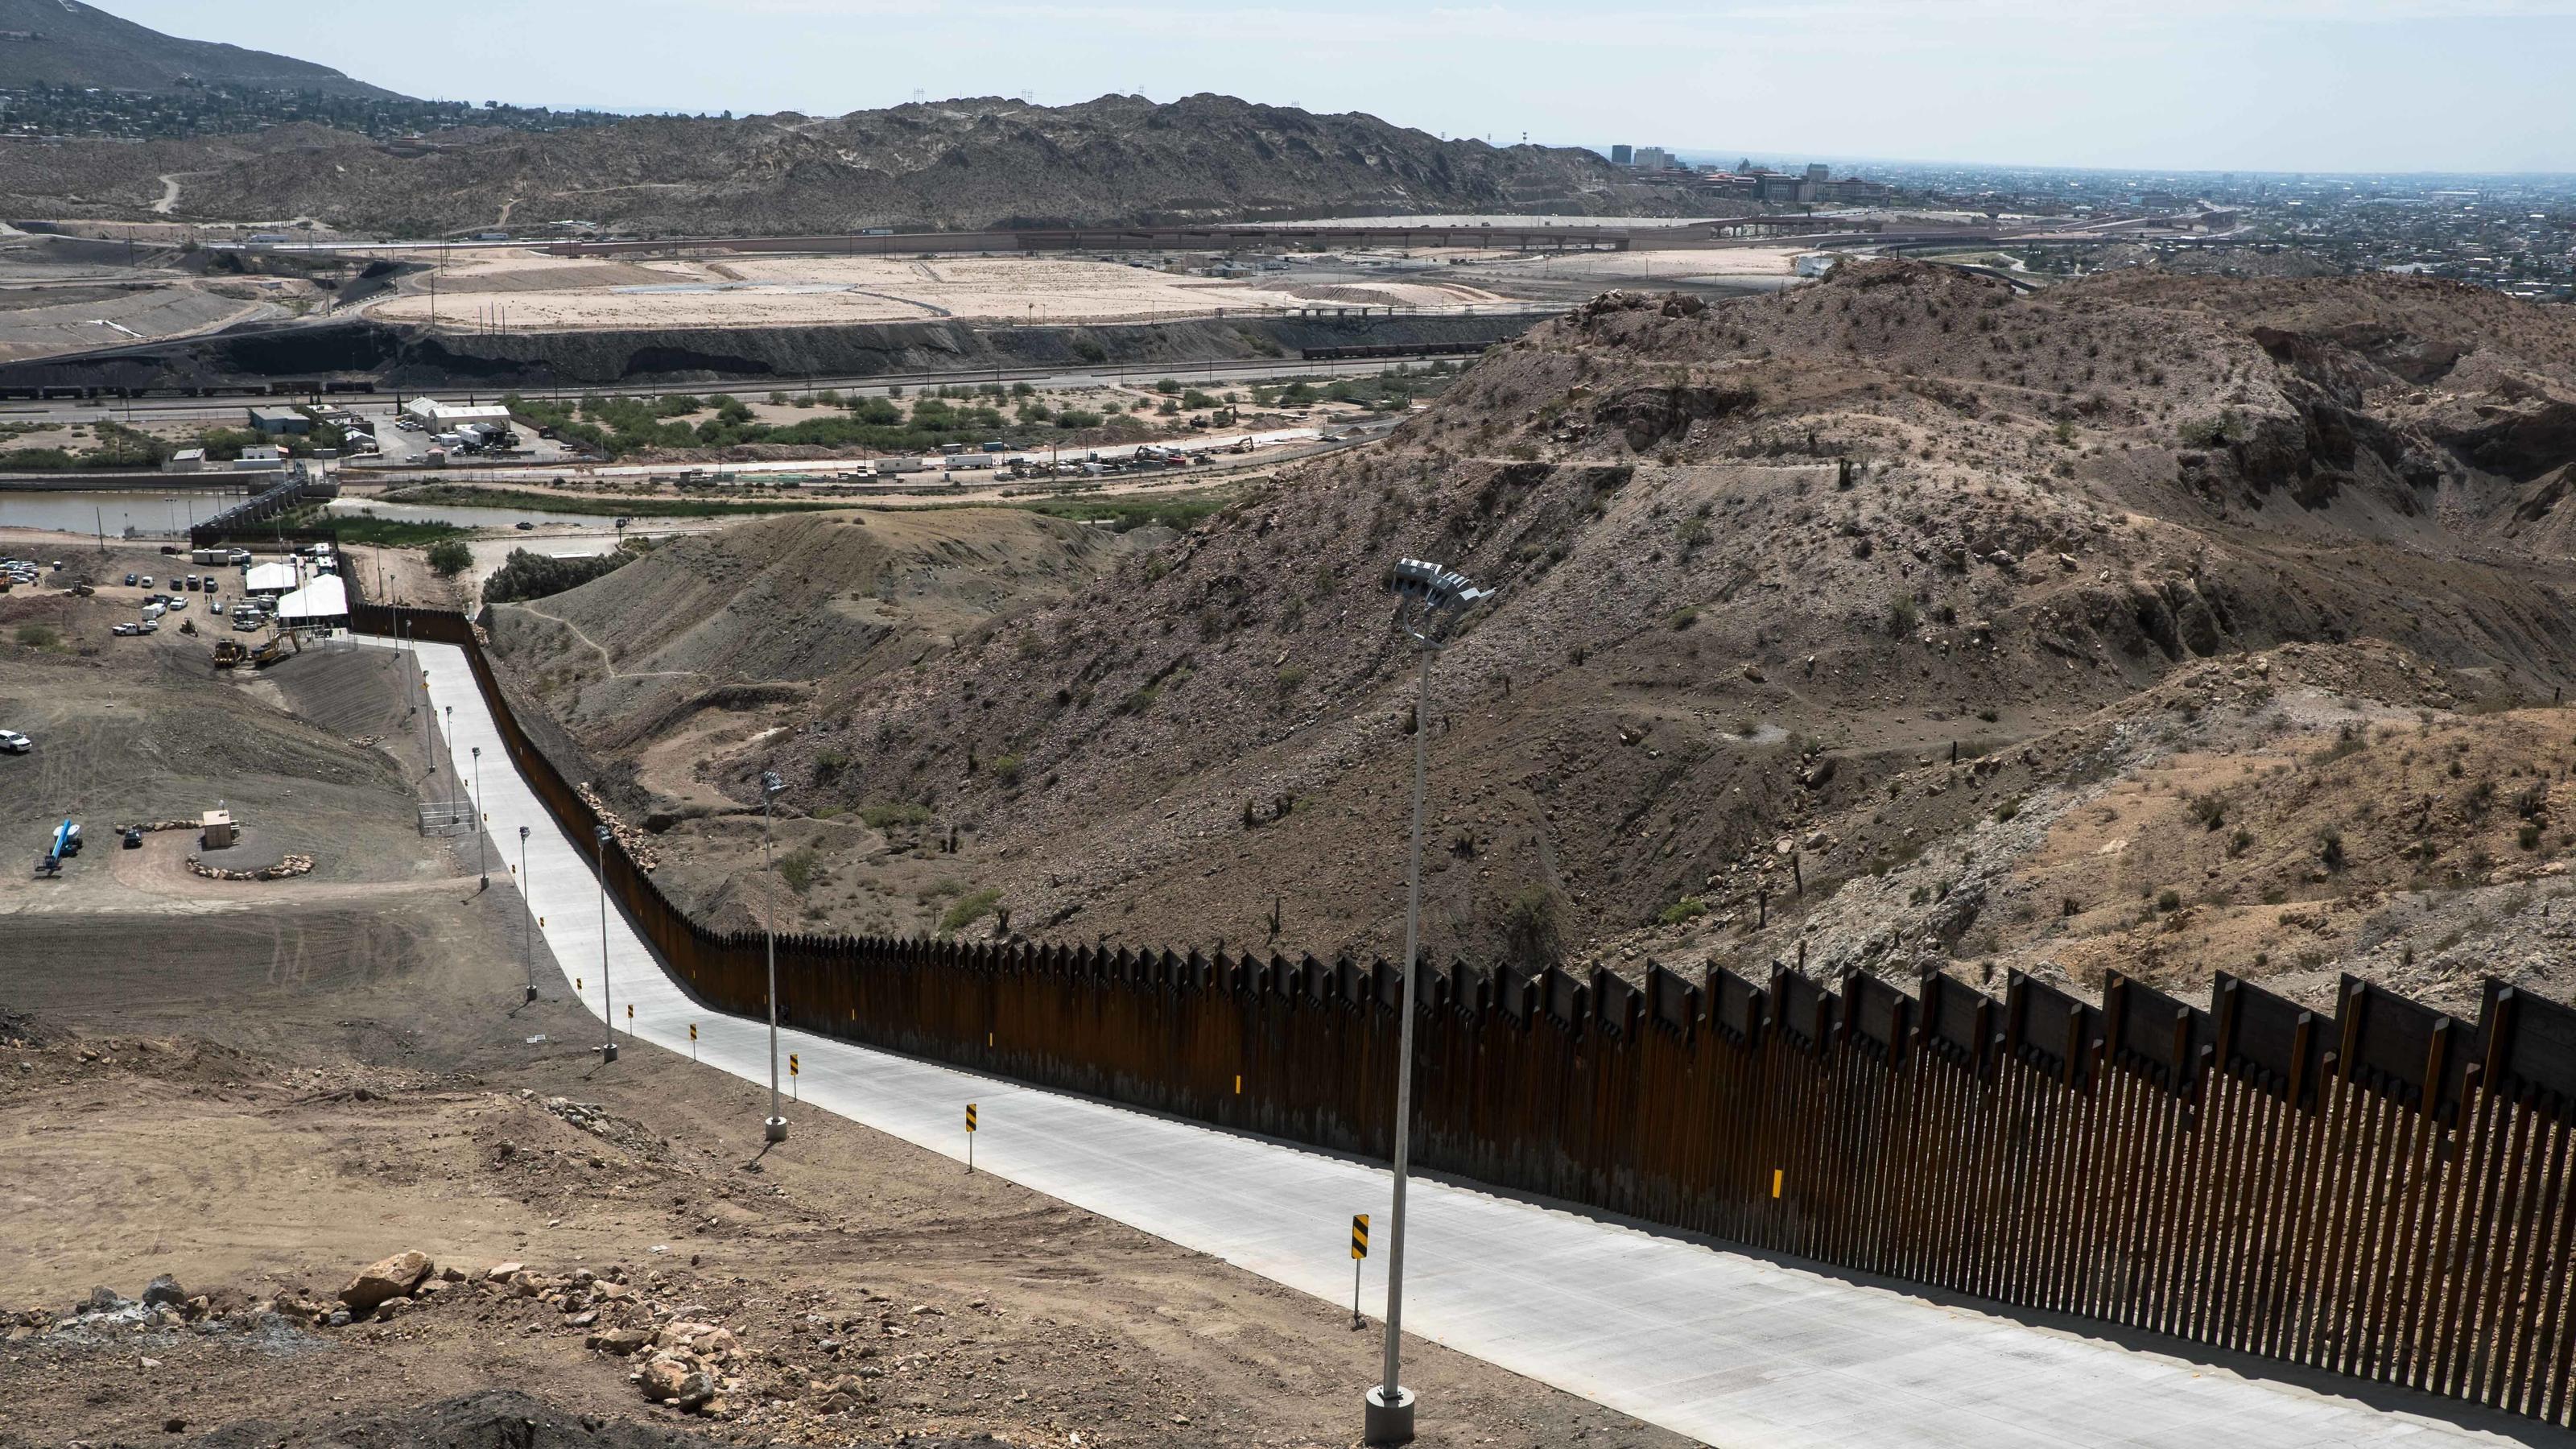 July 27, 2019, Sunland Park, New Mexico, USA: The privately-funded fence along the U.S.-Mexico border during the Symposium at The Wall event in Sunland Park, New Mexico. Sunland Park USA PUBLICATIONxINxGERxSUIxAUTxONLY - ZUMAj106 20190727_zap_j106_01